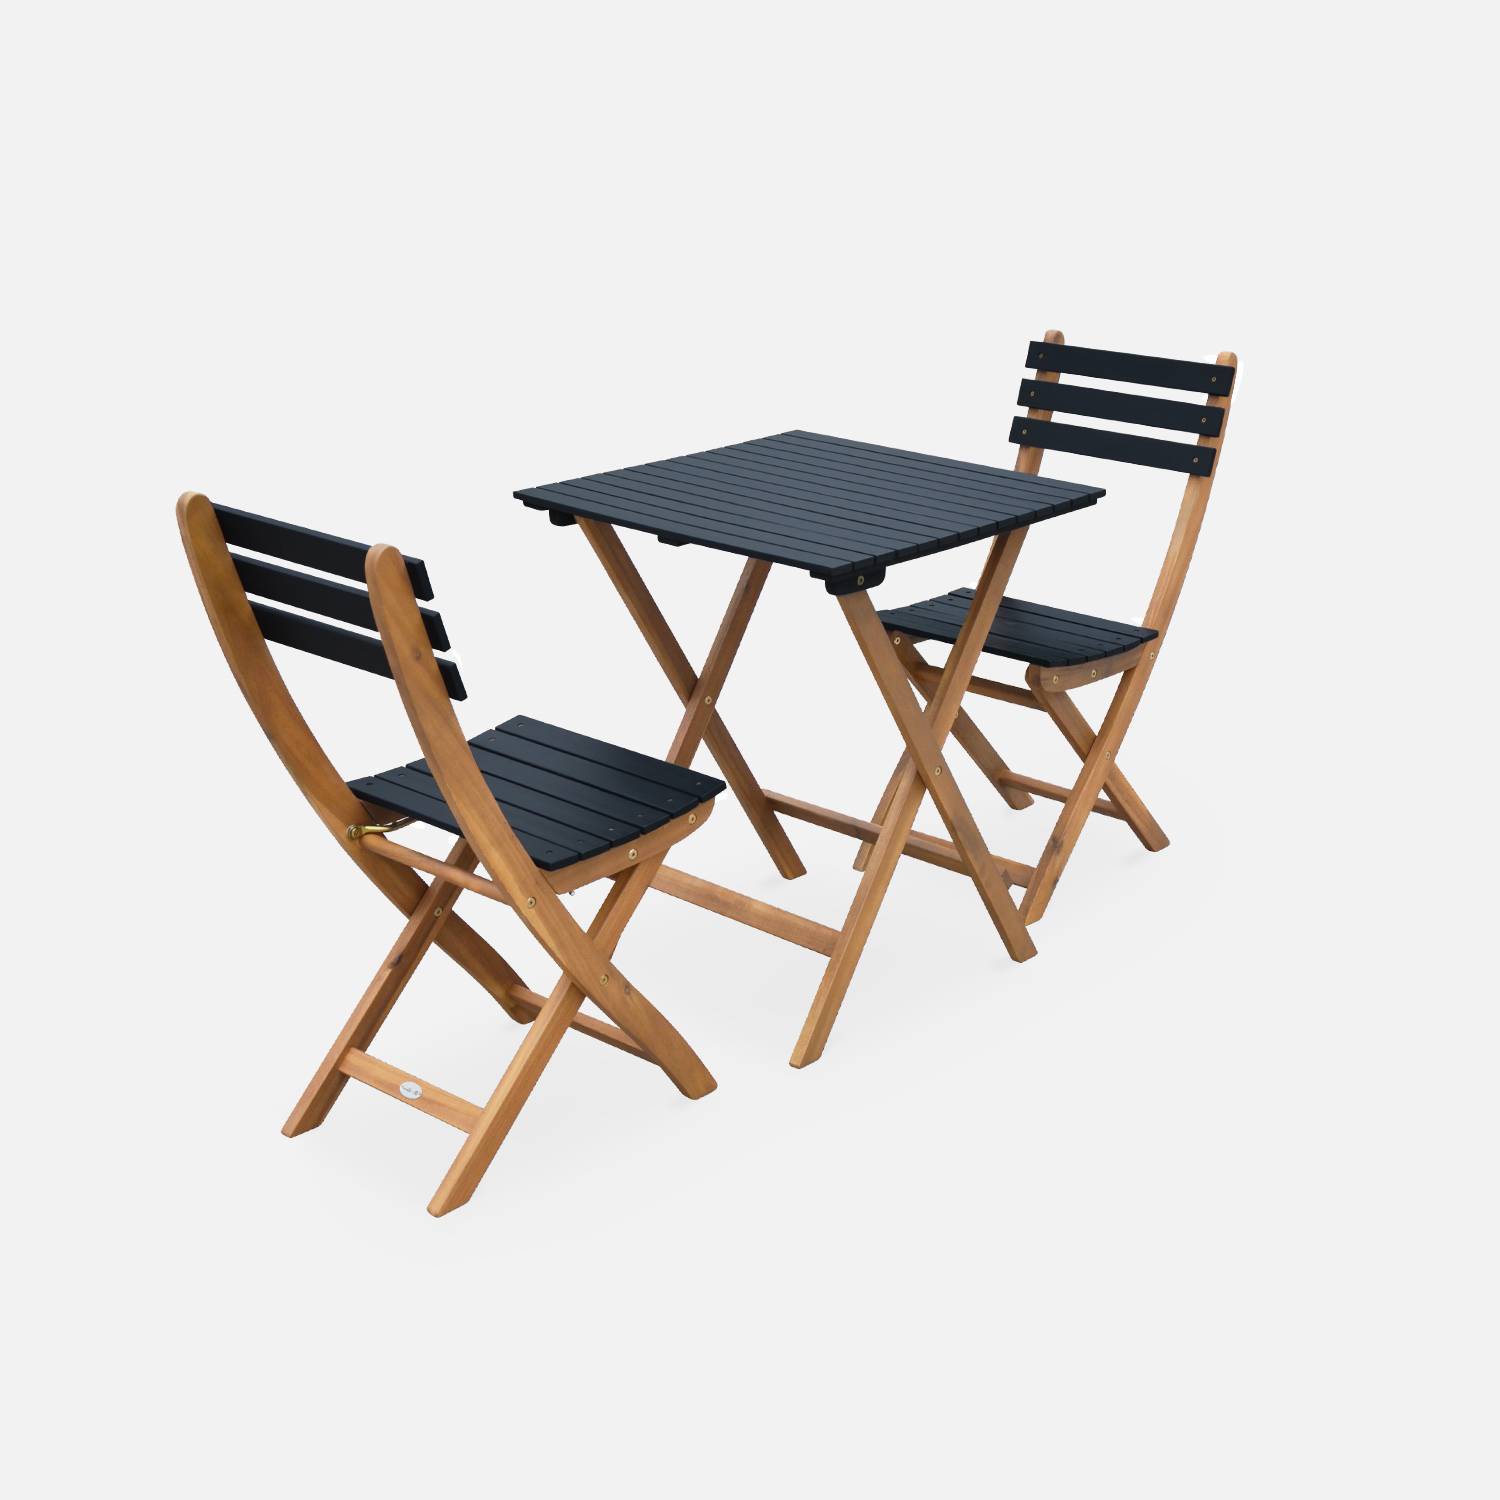 2-seater foldable wooden bistro garden table with chairs, 60x60cm, Black | sweeek